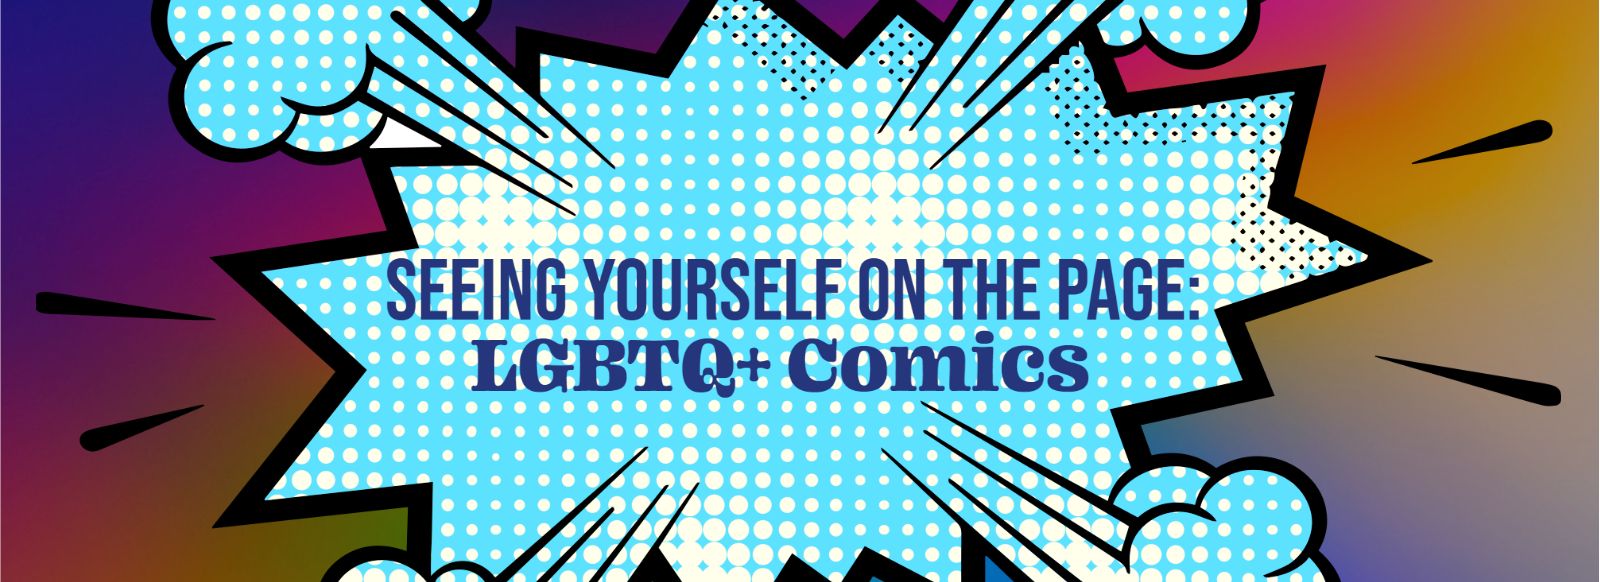 Seeing Yourself on the Page: LGBTQ+ Comics